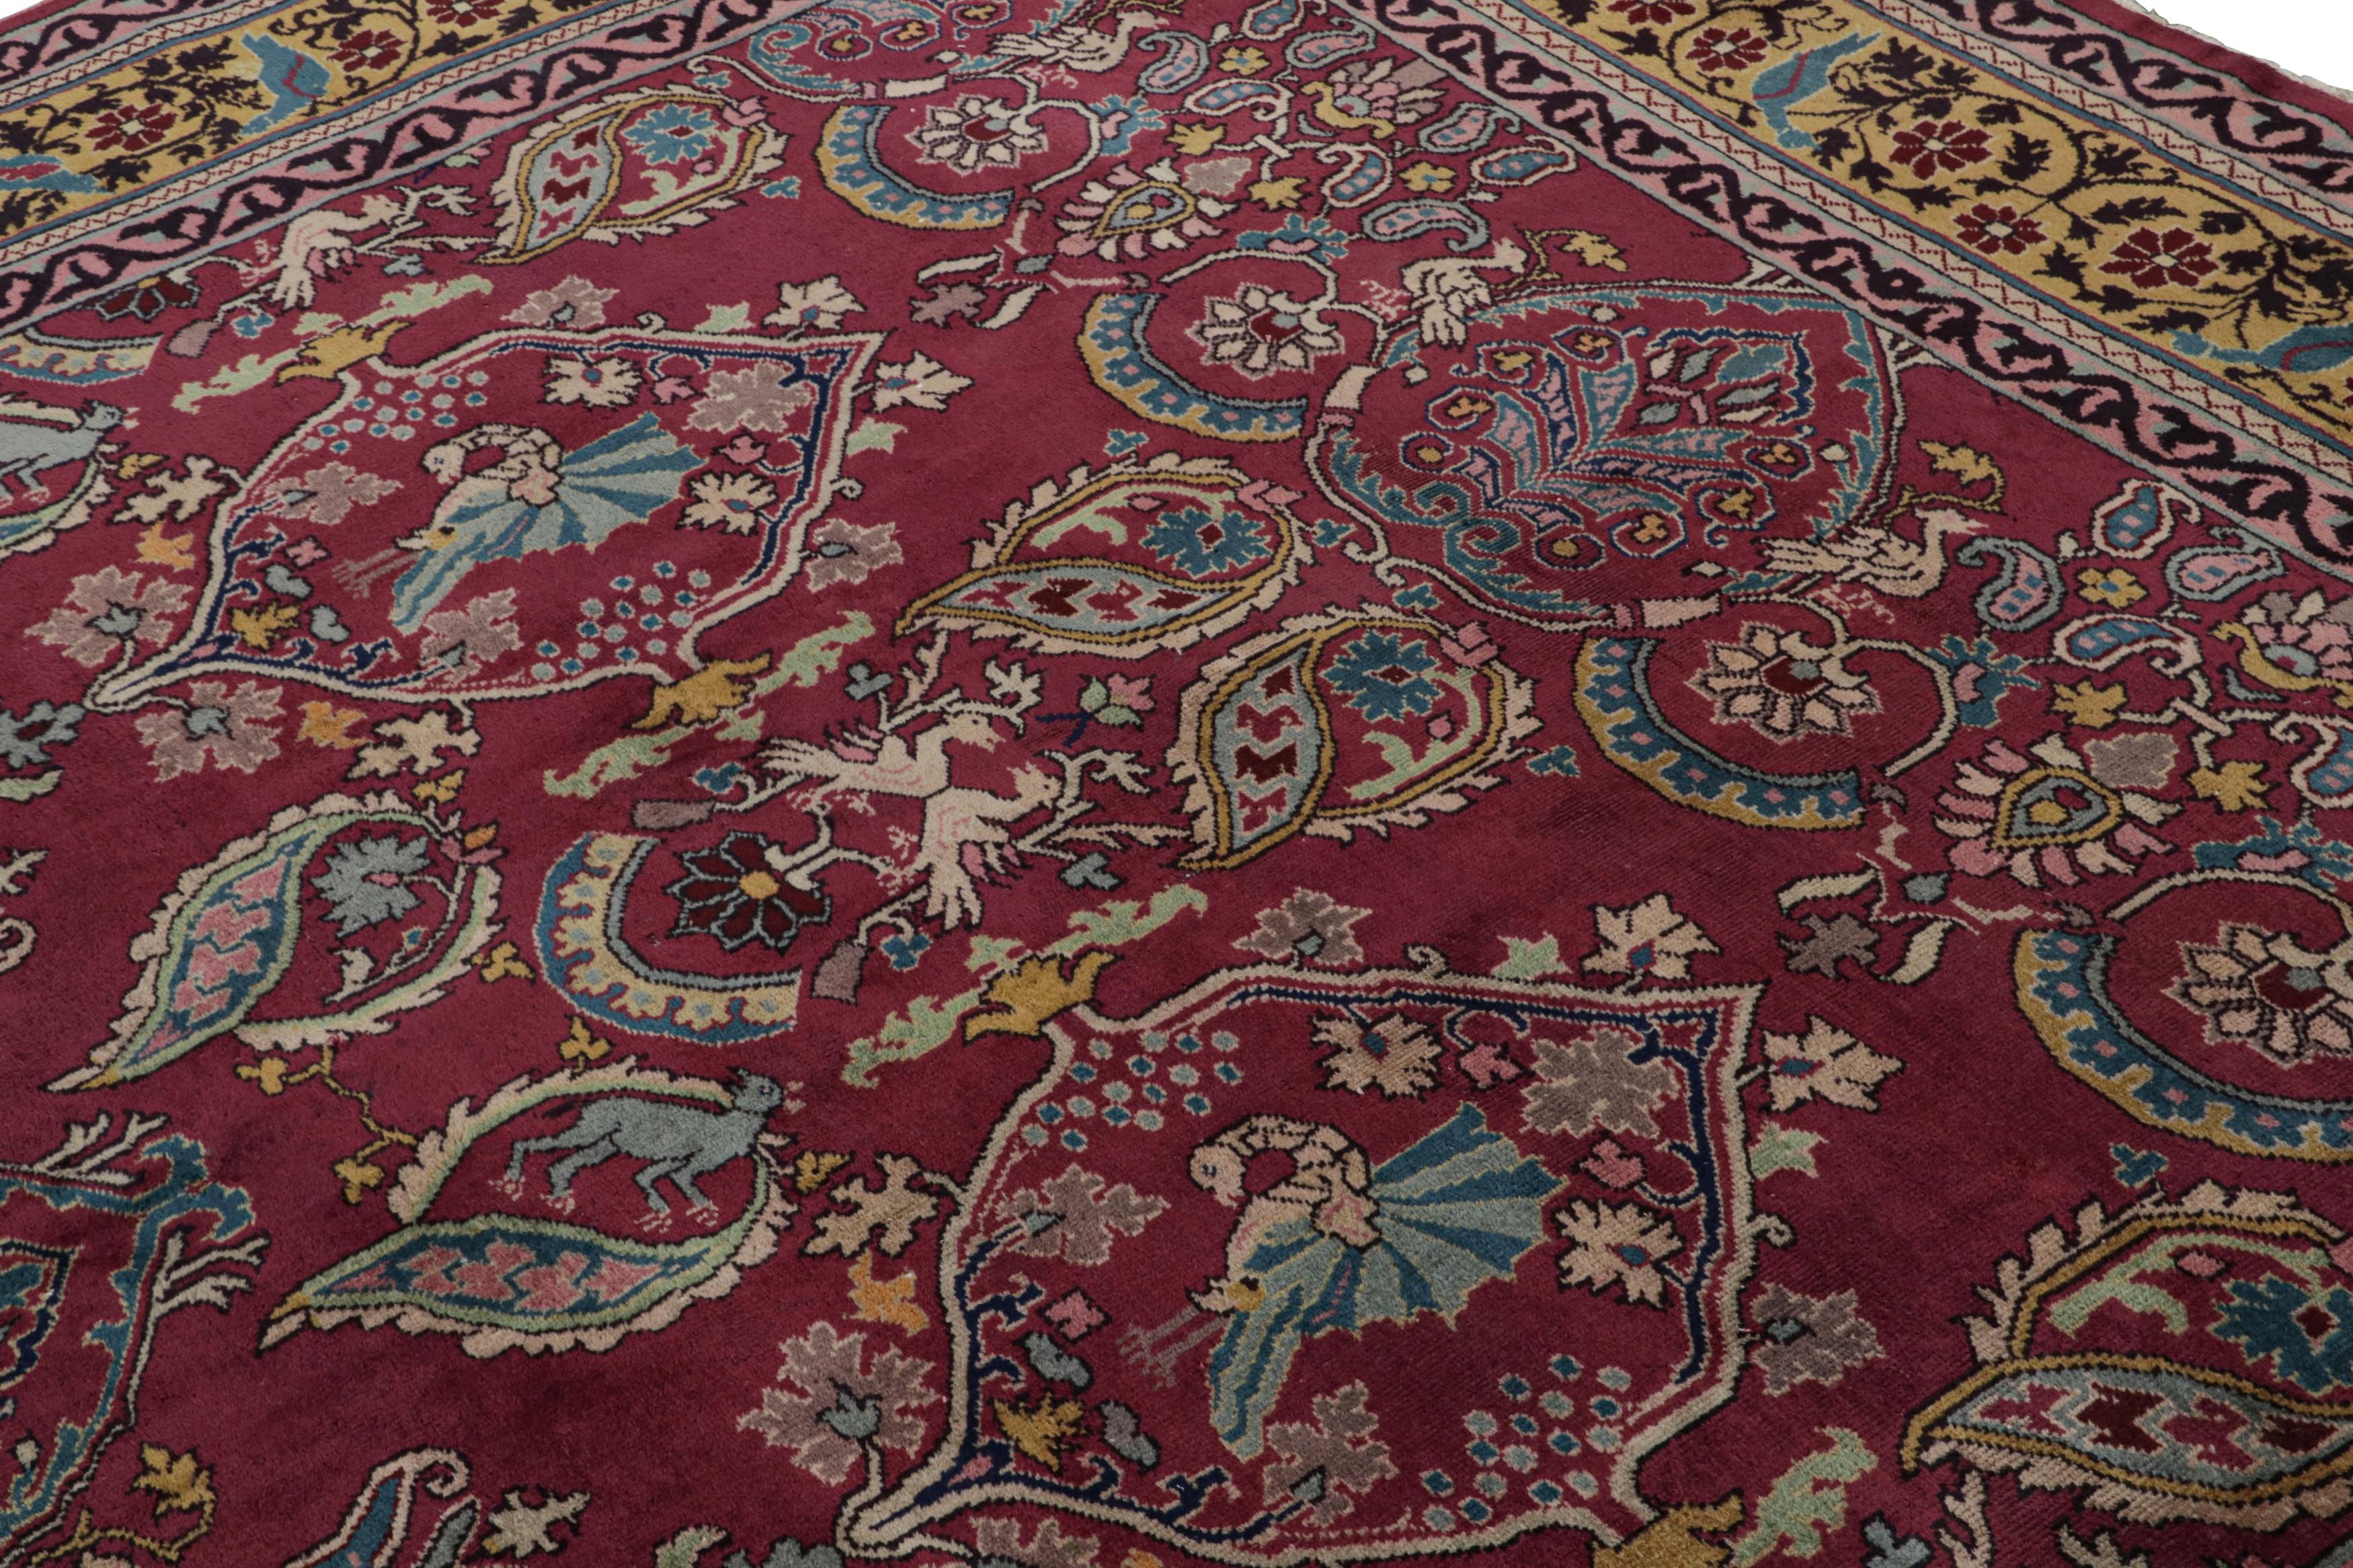 Hand-Knotted Antique Indian Rug in Burgundy and Gold with Floral Patterns For Sale